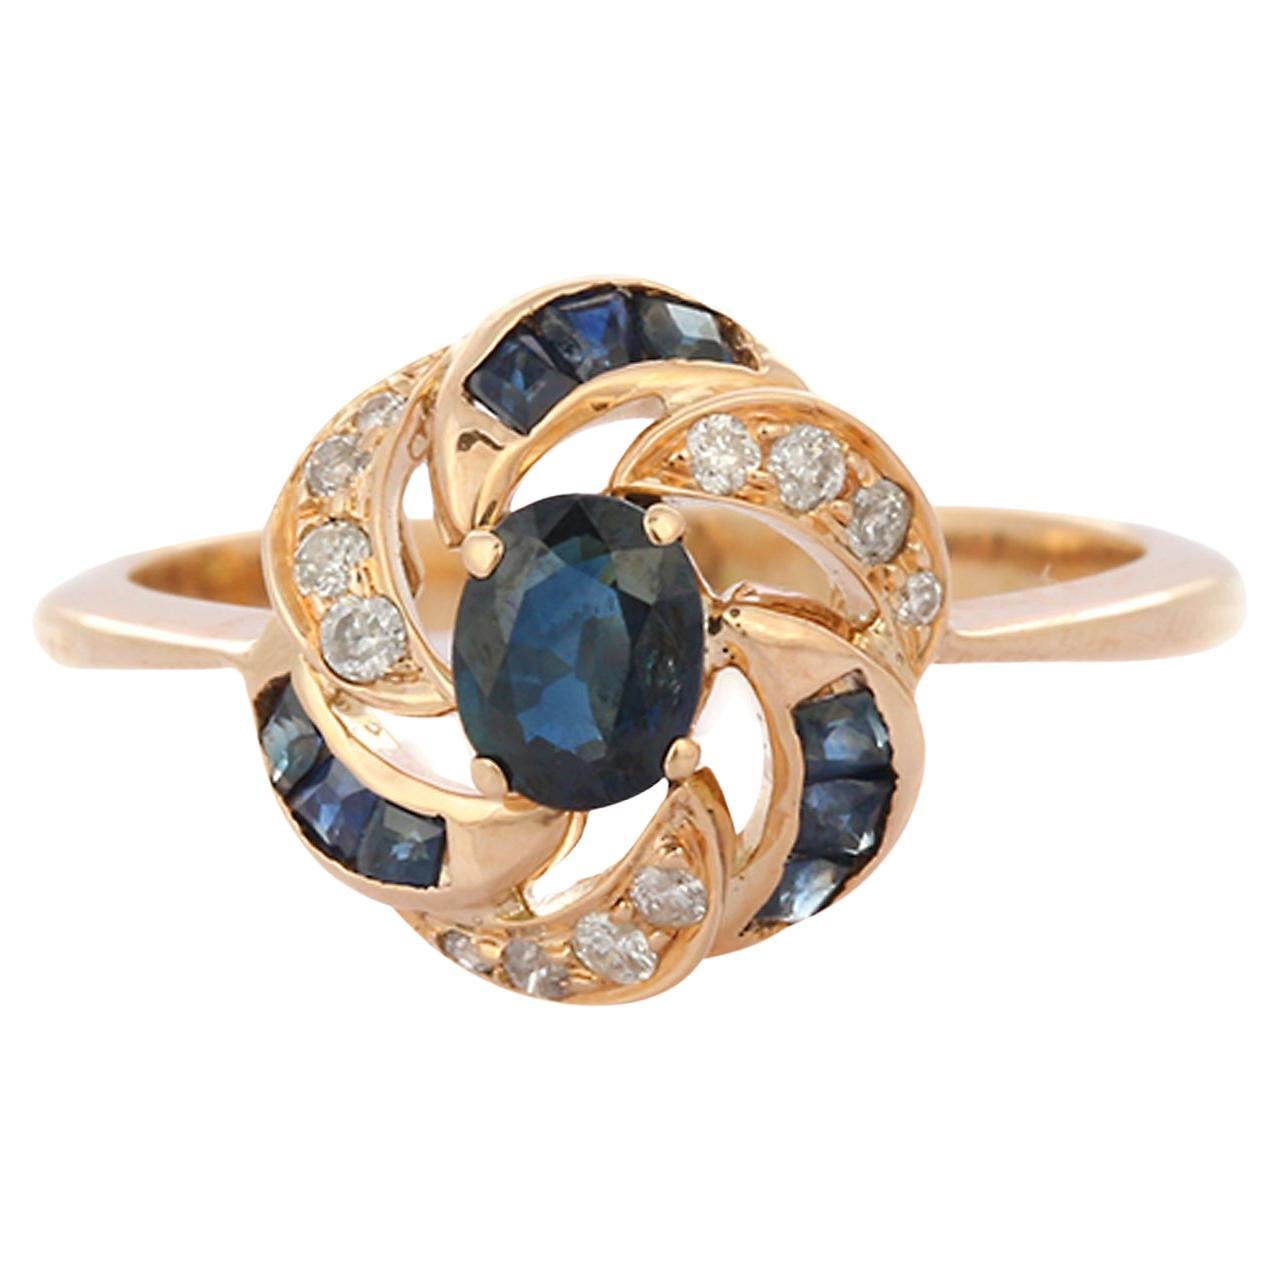 For Sale:  Enticing Sapphire Diamond Floral Bridal Ring in 14K Solid Yellow Gold